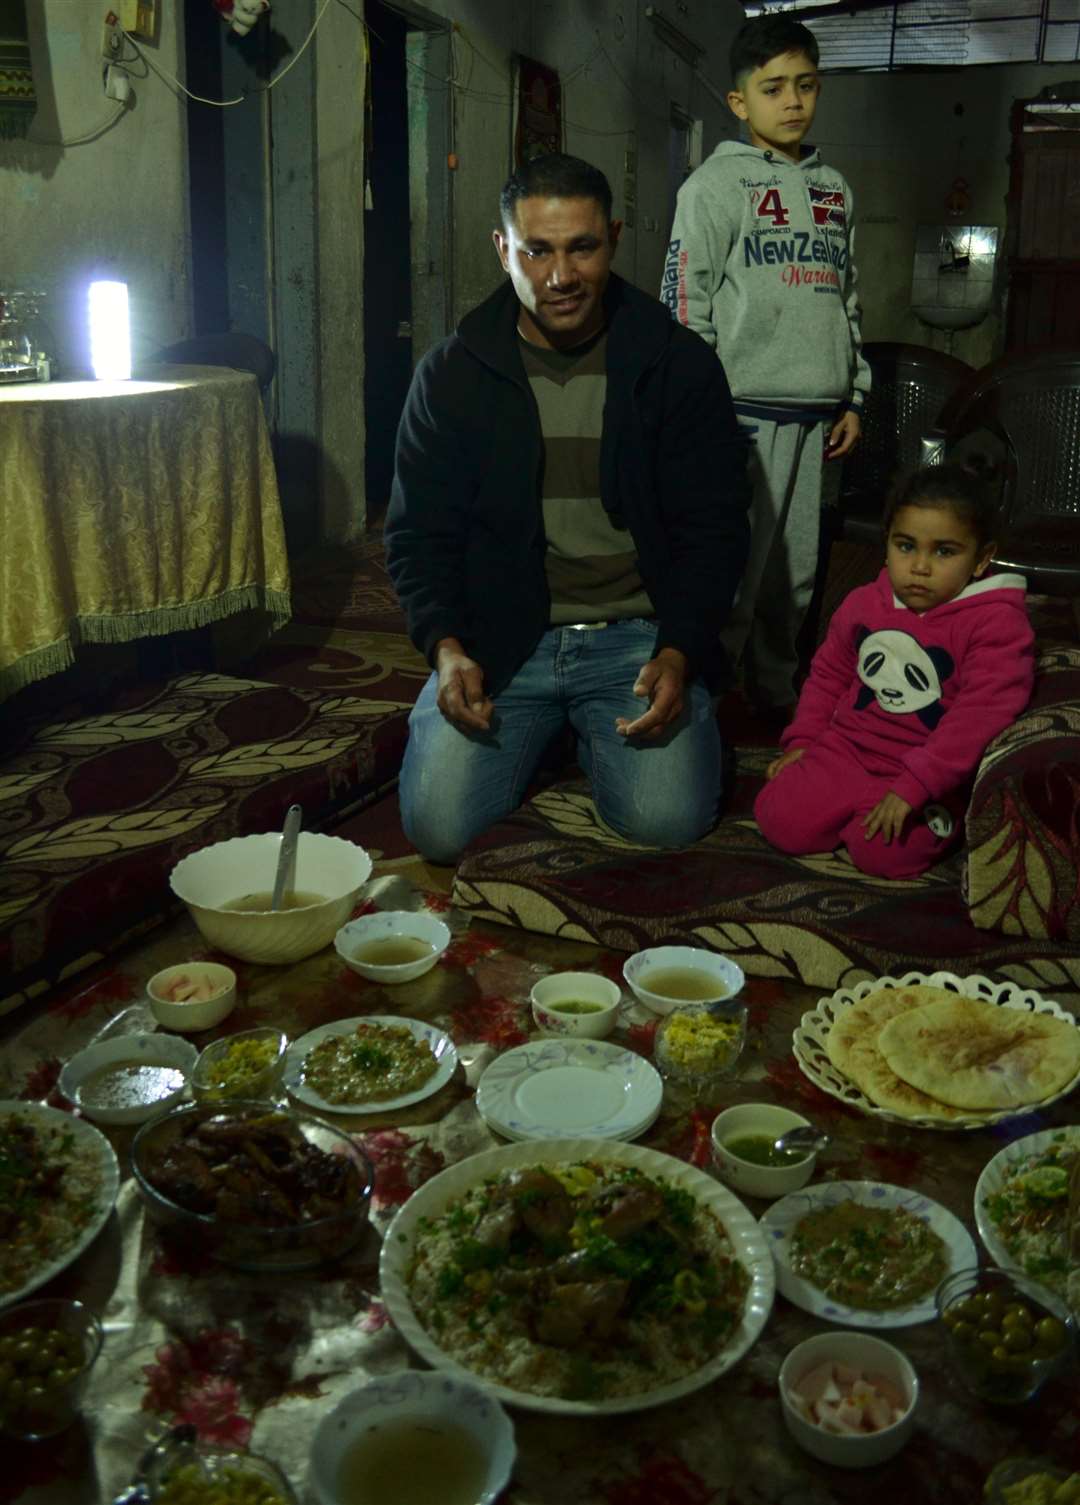 Sharing a meal with Shadi and his family